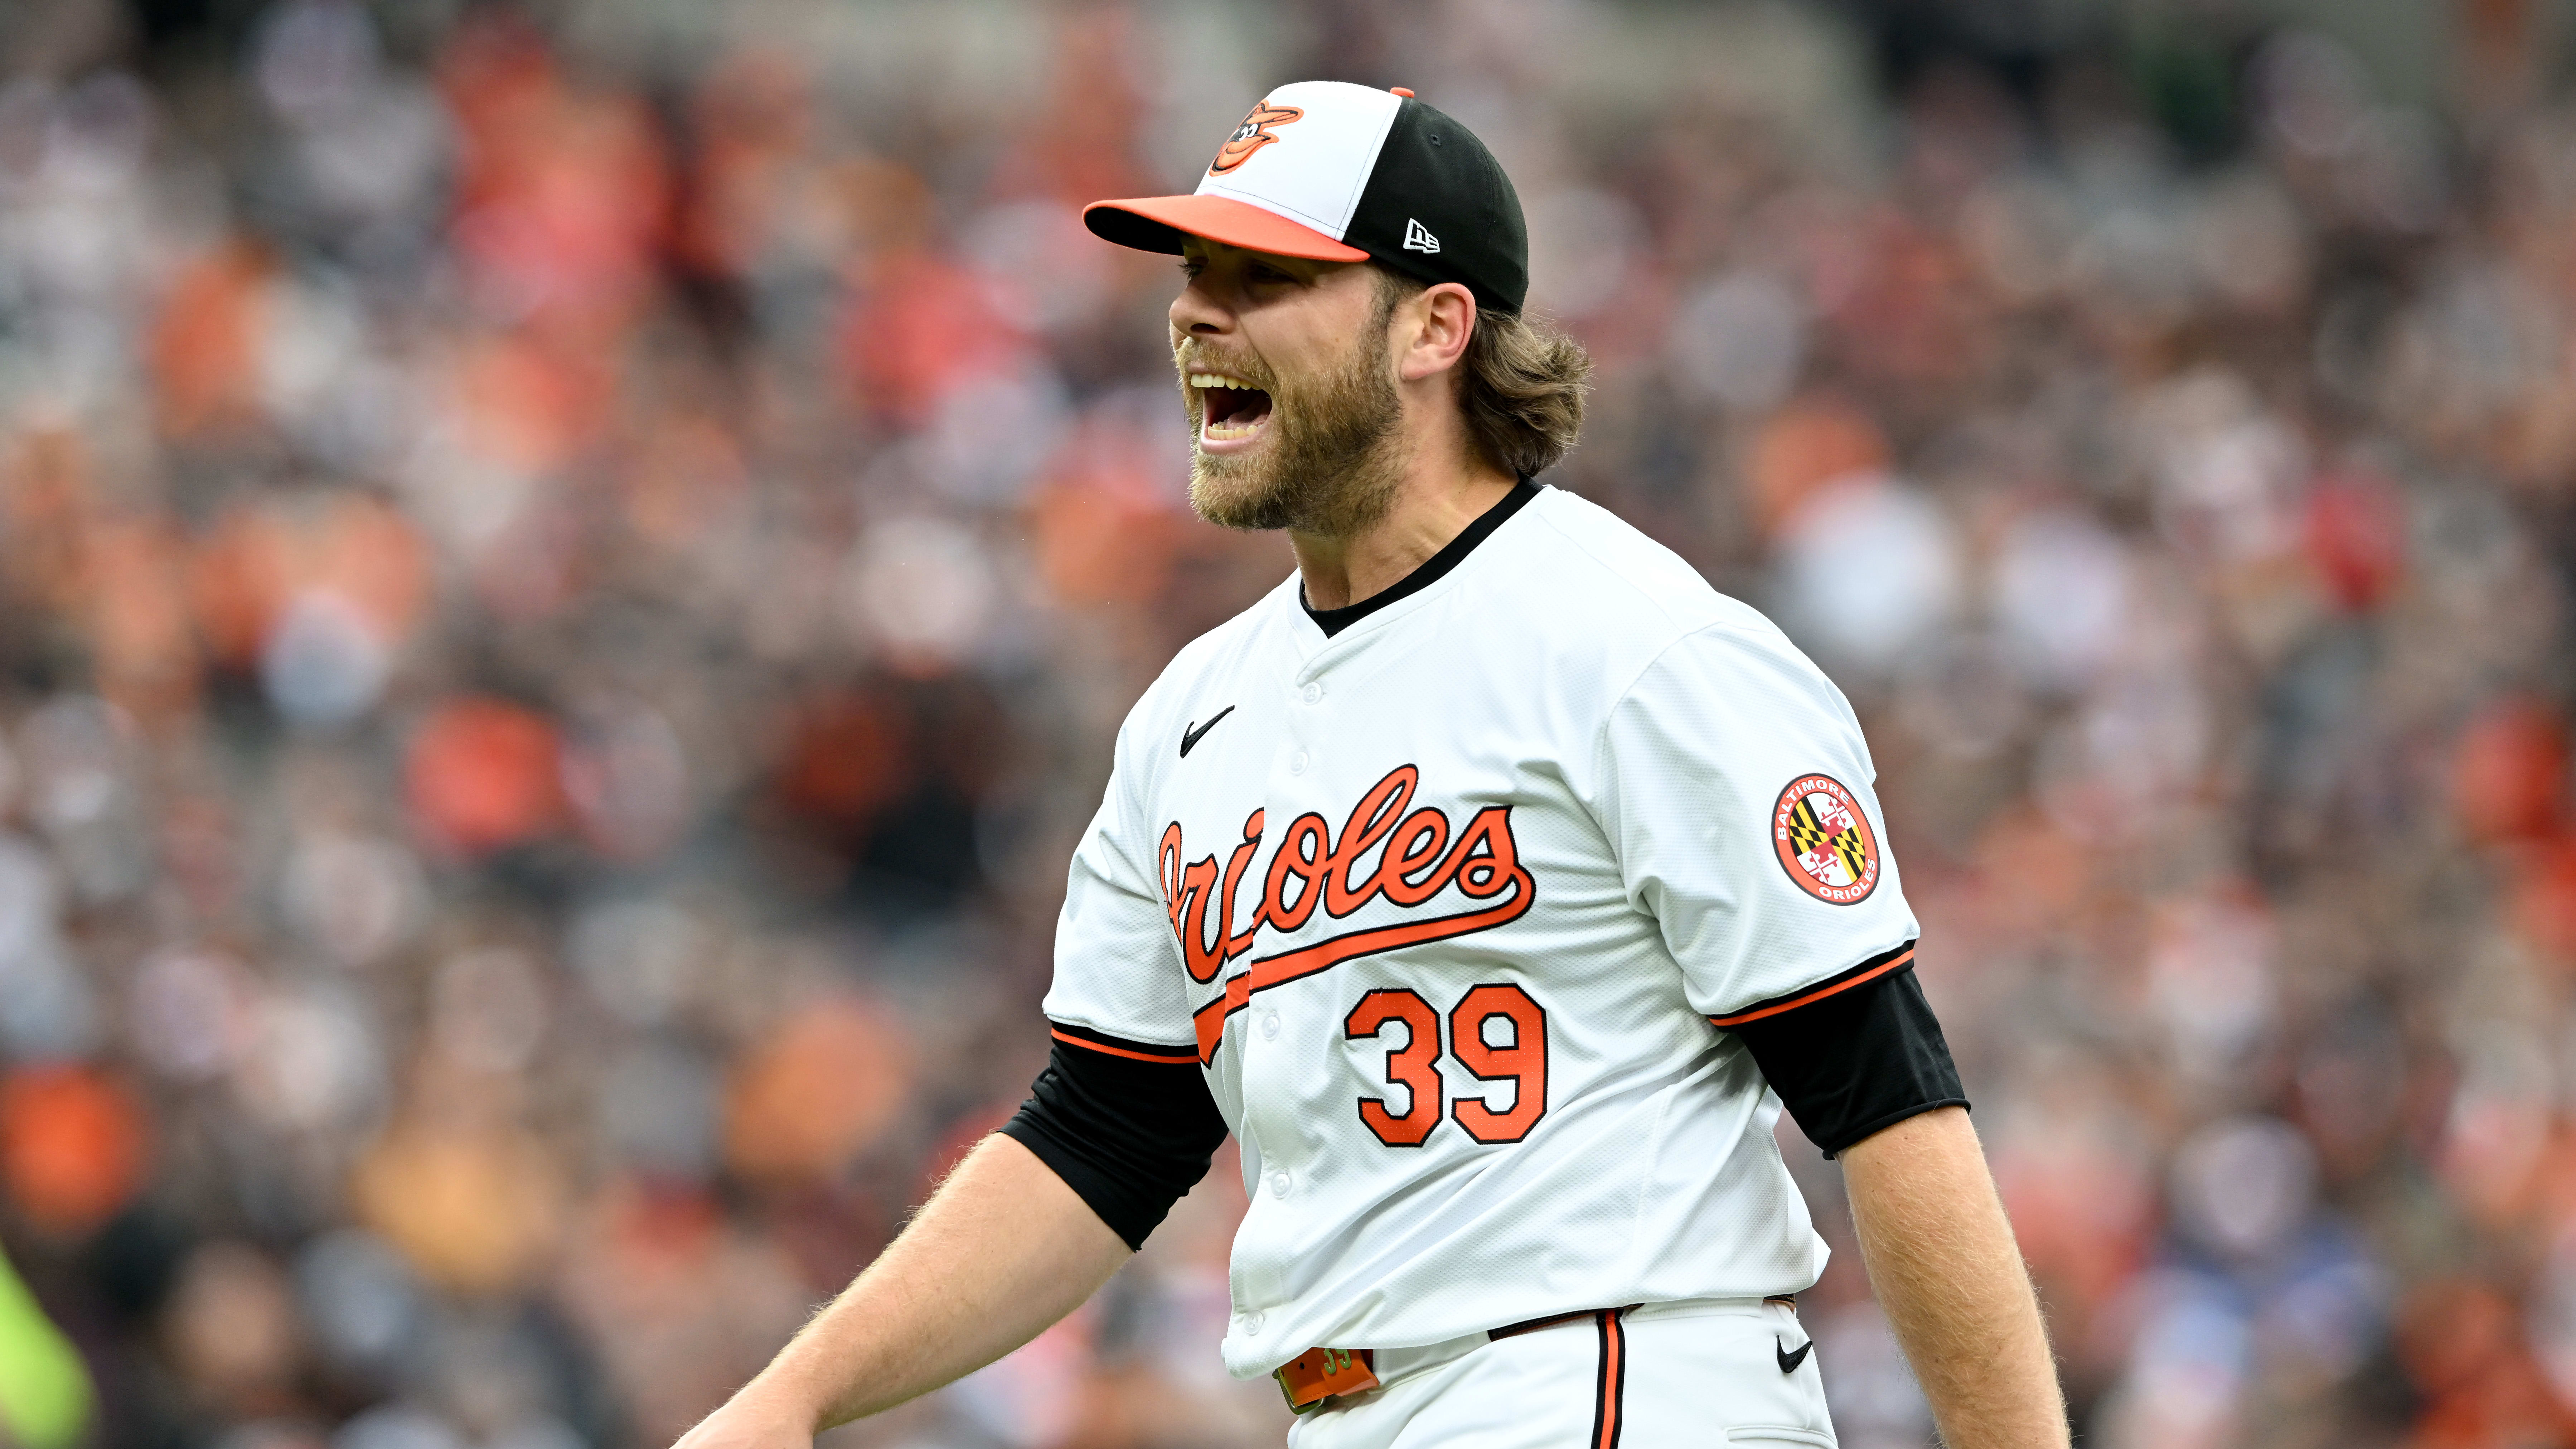 Baltimore Orioles pitcher Corbin Burnes faces the Los Angeles Angels on Opening Day at Camden Yards.